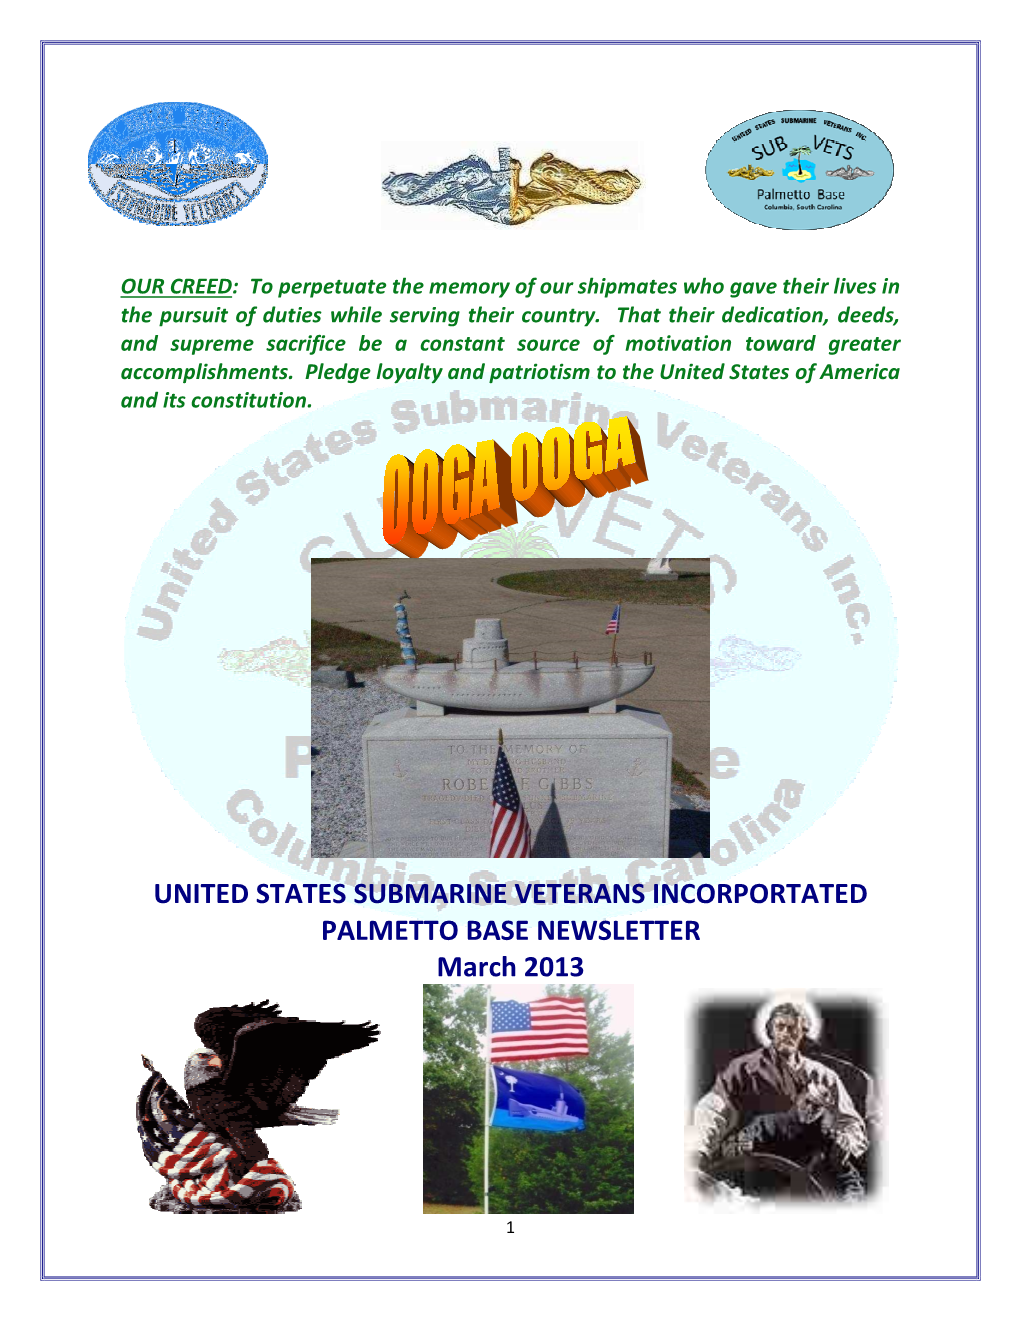 UNITED STATES SUBMARINE VETERANS INCORPORTATED PALMETTO BASE NEWSLETTER March 2013